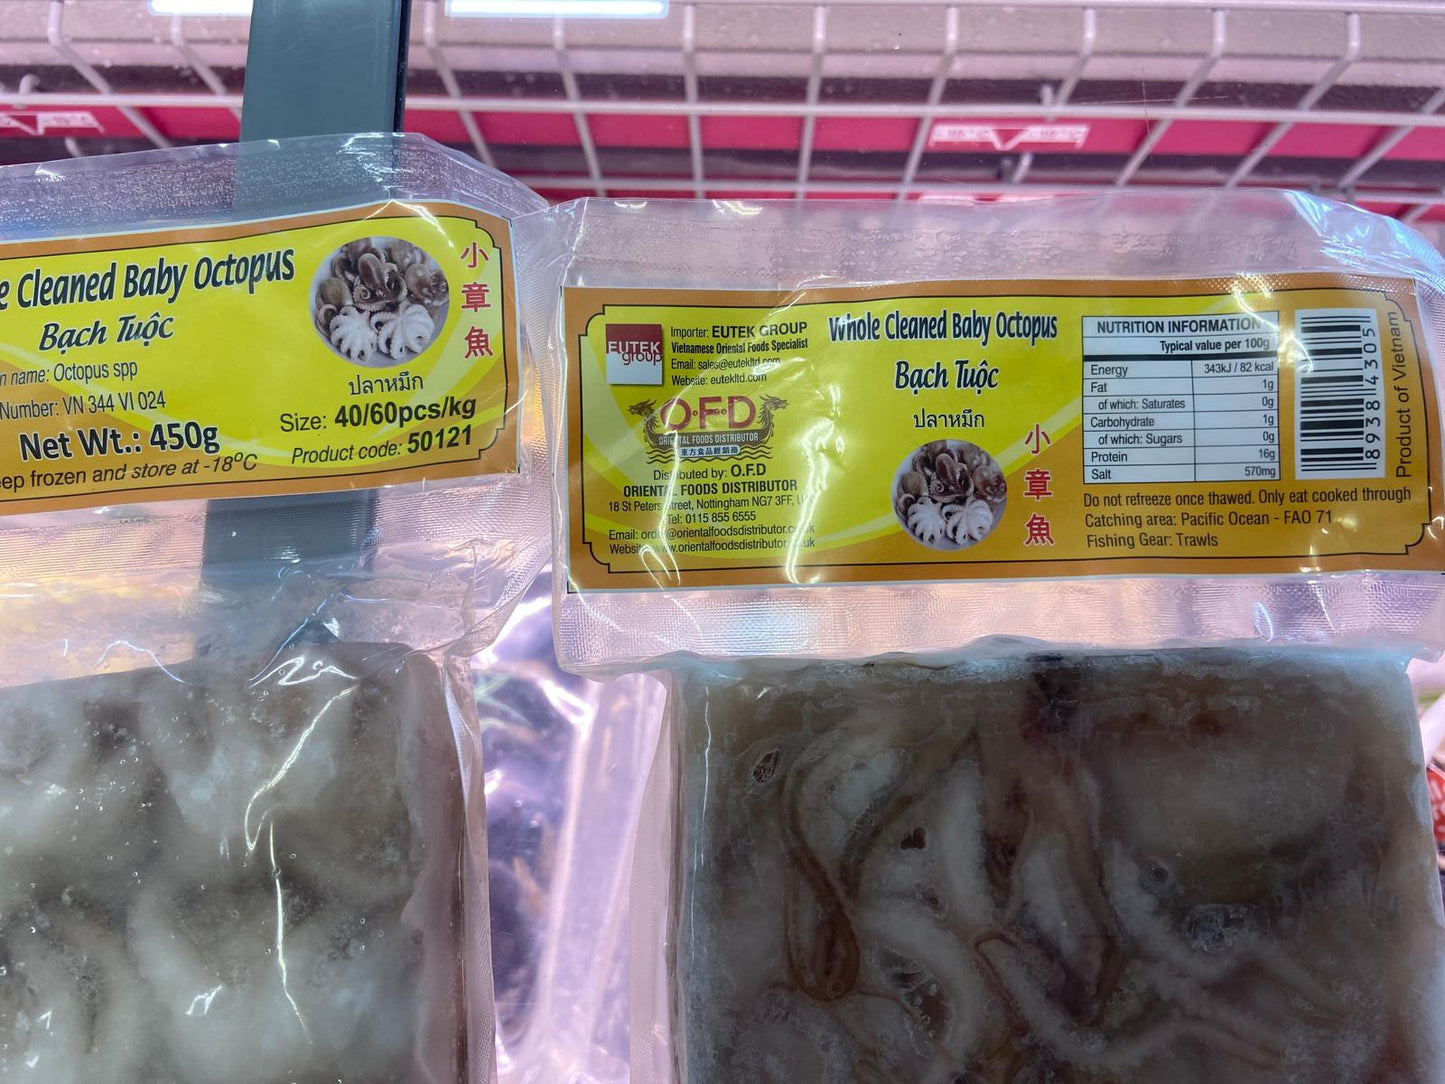 Seahorse King Frozen Whole Cleaned Baby Octopus 40/60 小章魚Bach Tuoc Nguyen Con Lam Sach 450g x 1